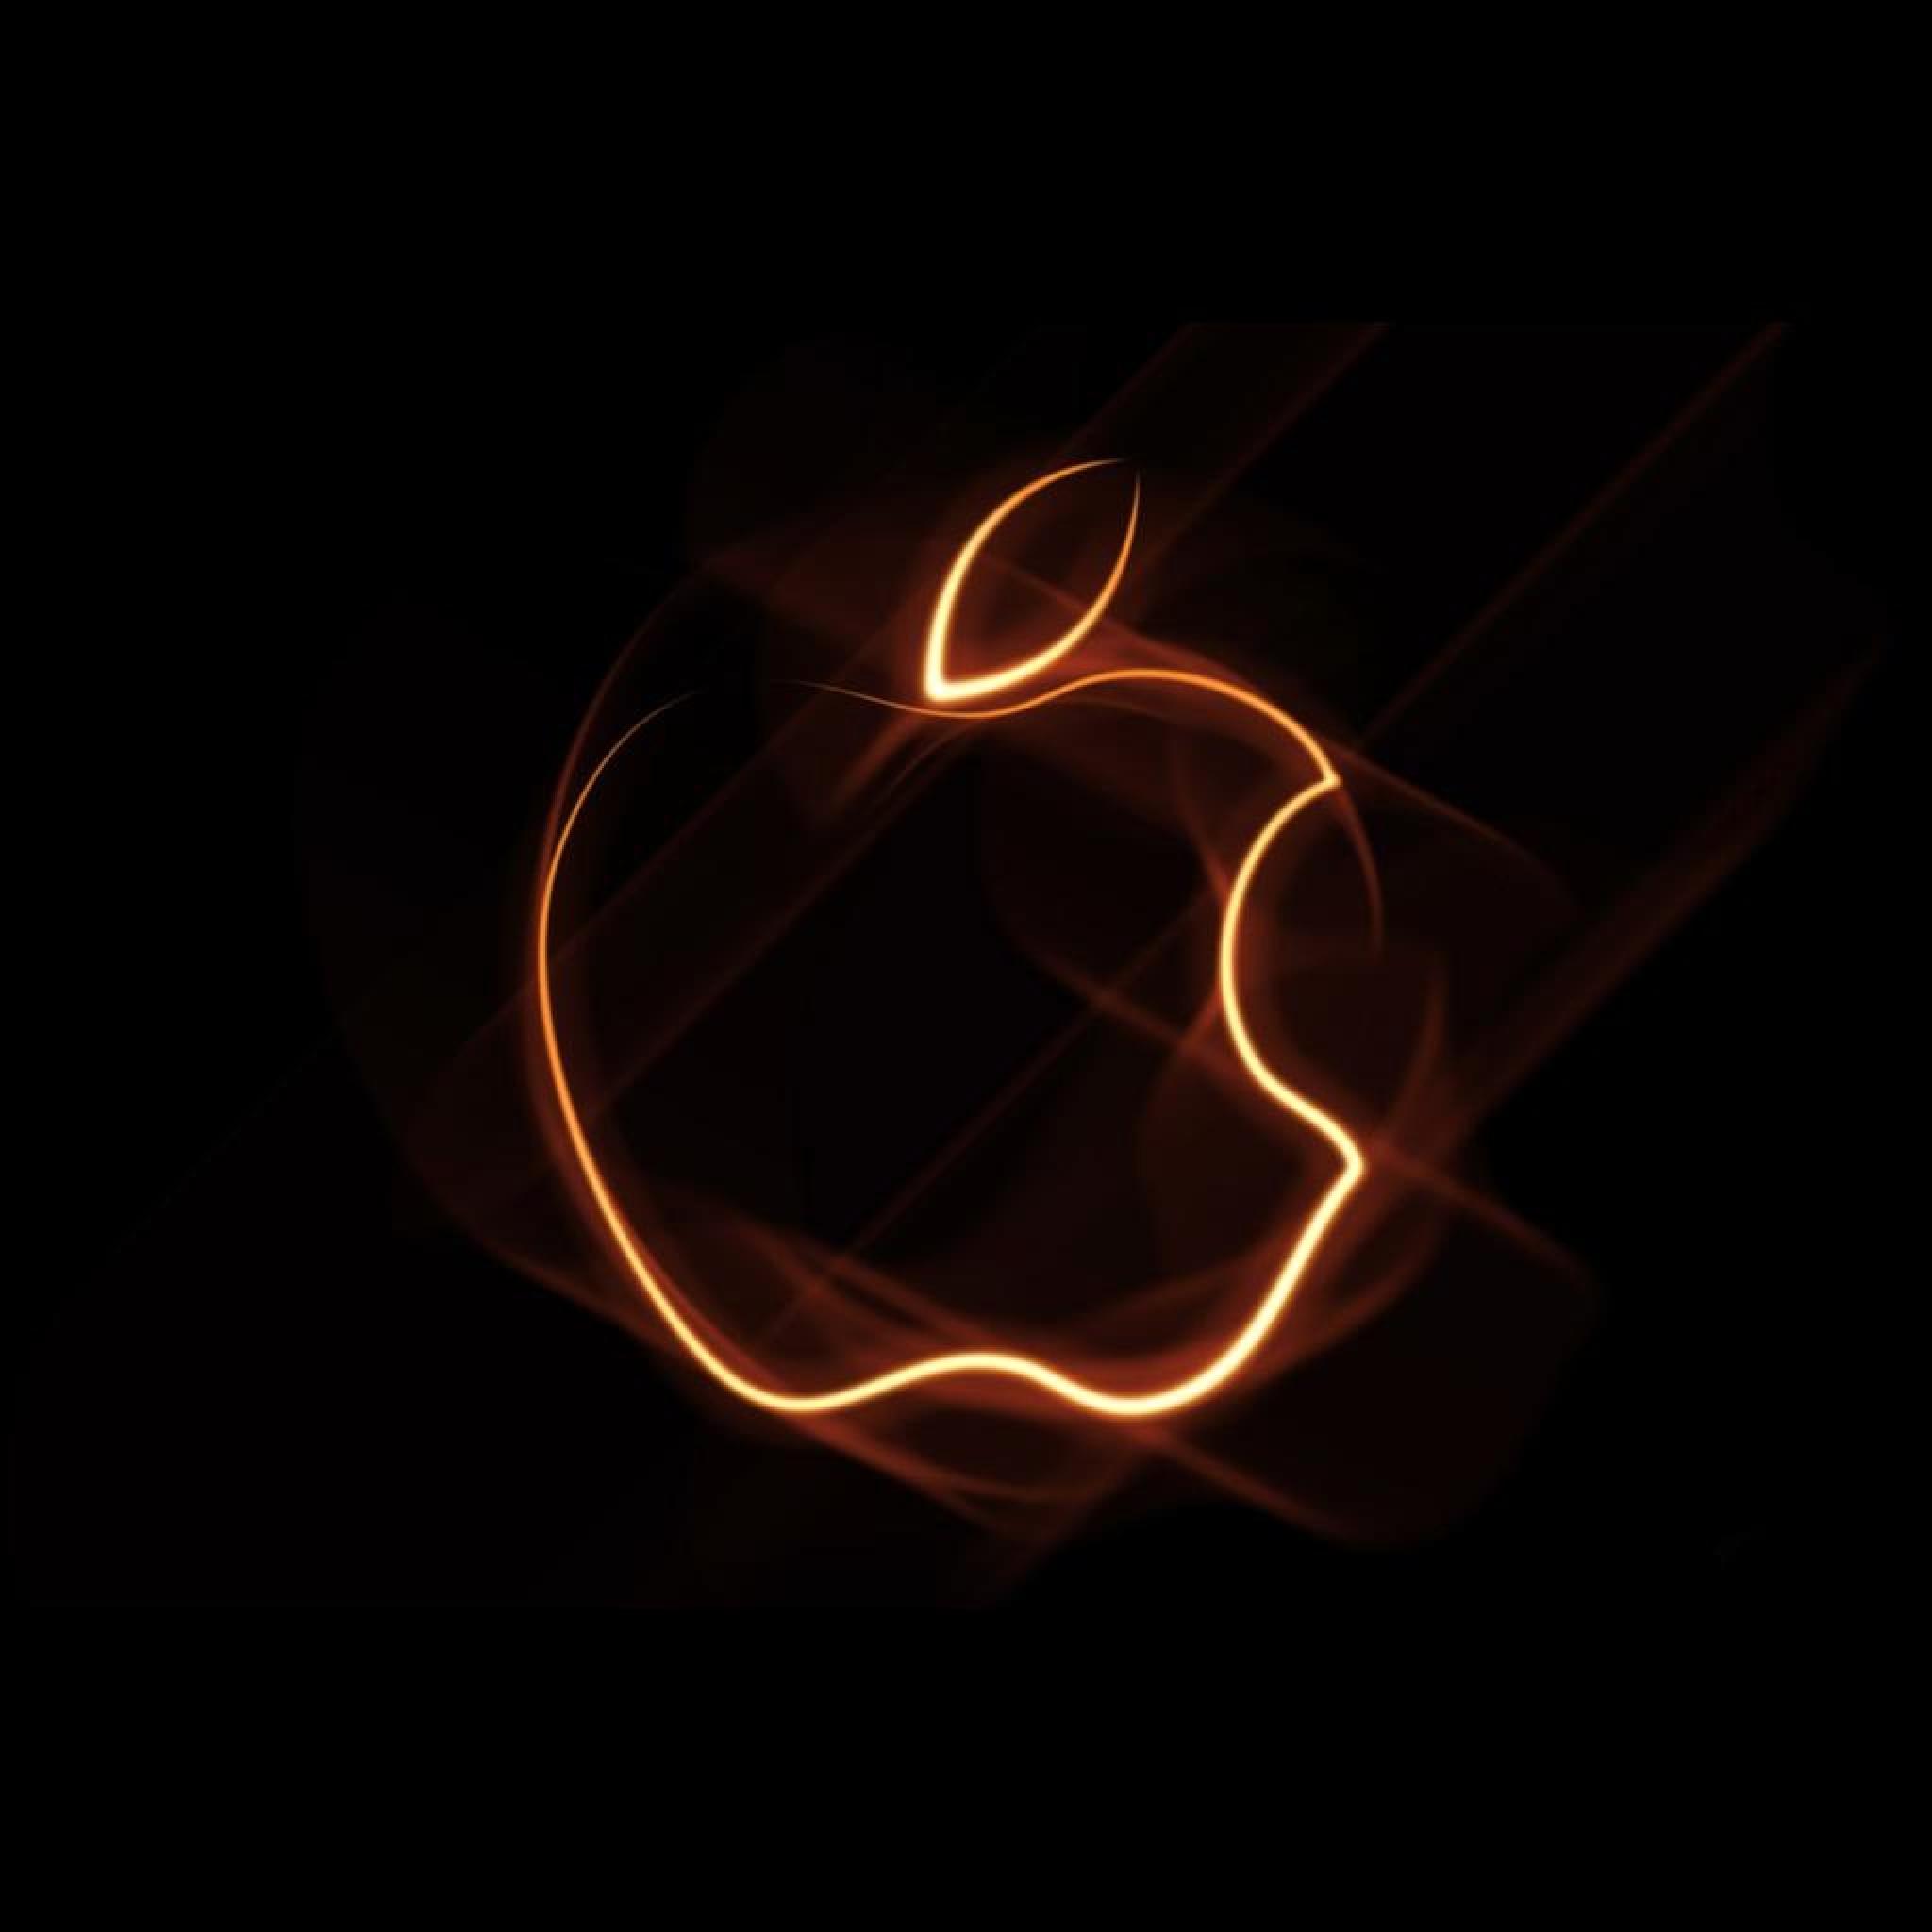 Computer Brand New Ipad Genuine Glowing Apple Logo Wallpaper For Ipad 4 Computer Wallpapers The New Ipad Wallpapers Ipad 4 Wallpapers Ipad タブレット壁紙ギャラリー